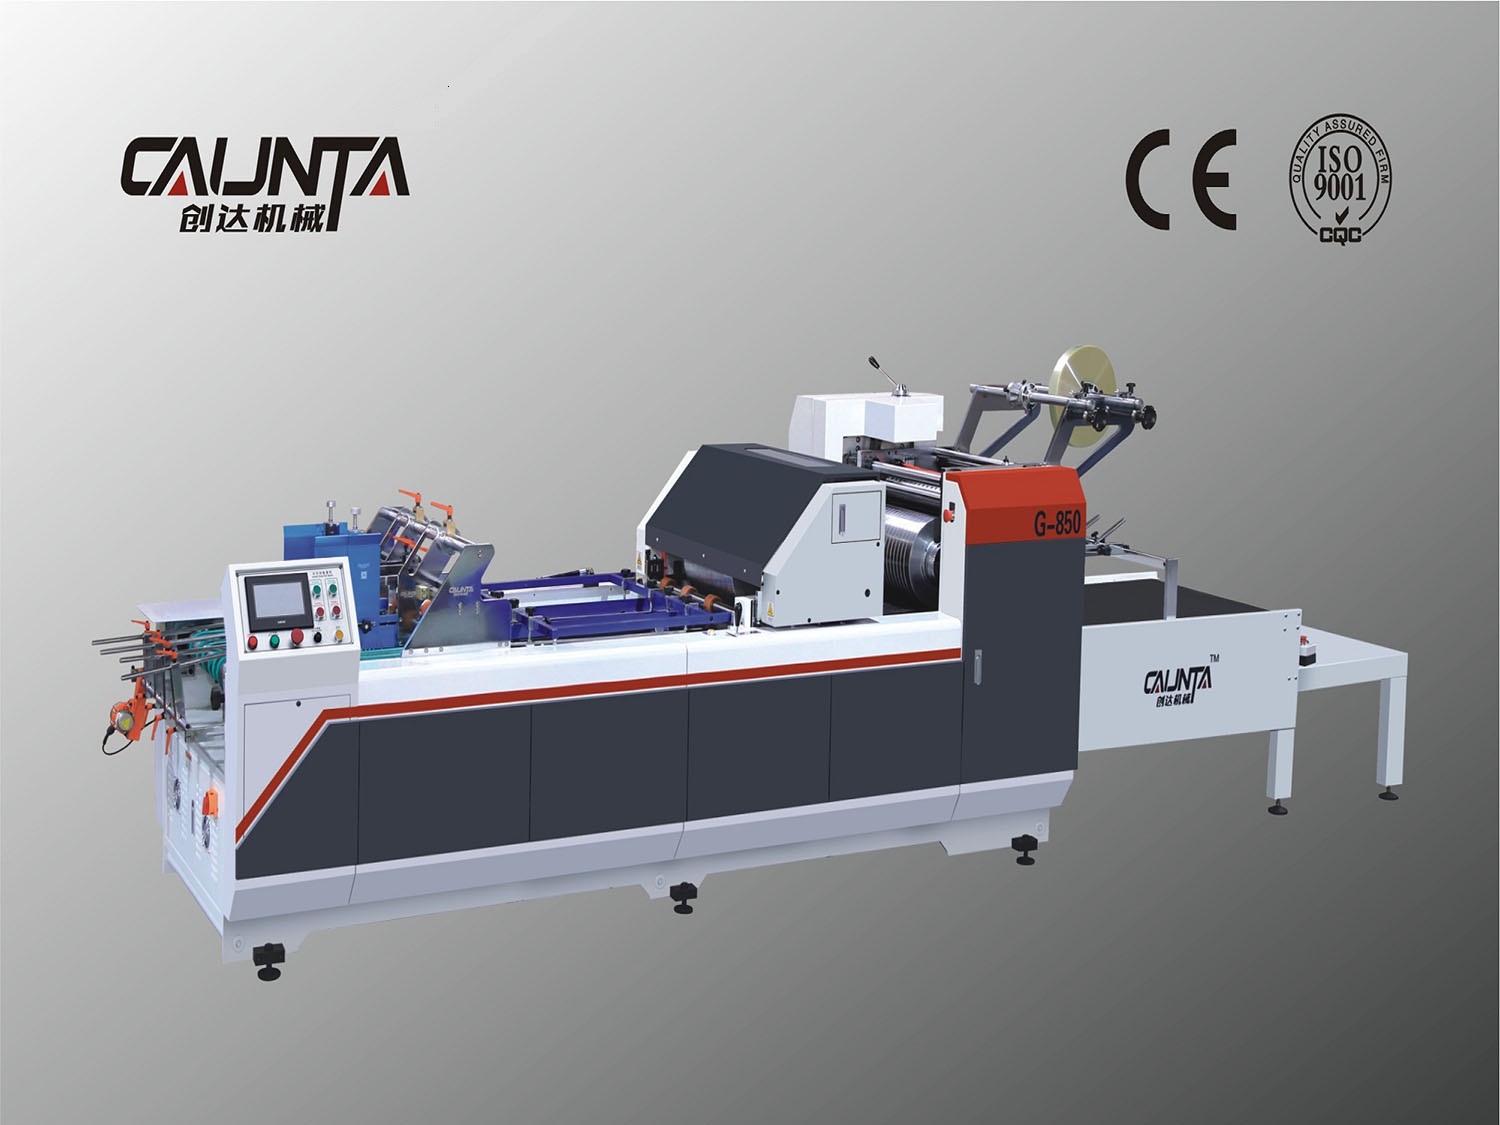 2019 Good Quality Window Patching Machine With Creasing - G-850 Full-automatic High-speed Window Patching Machine – Caunta